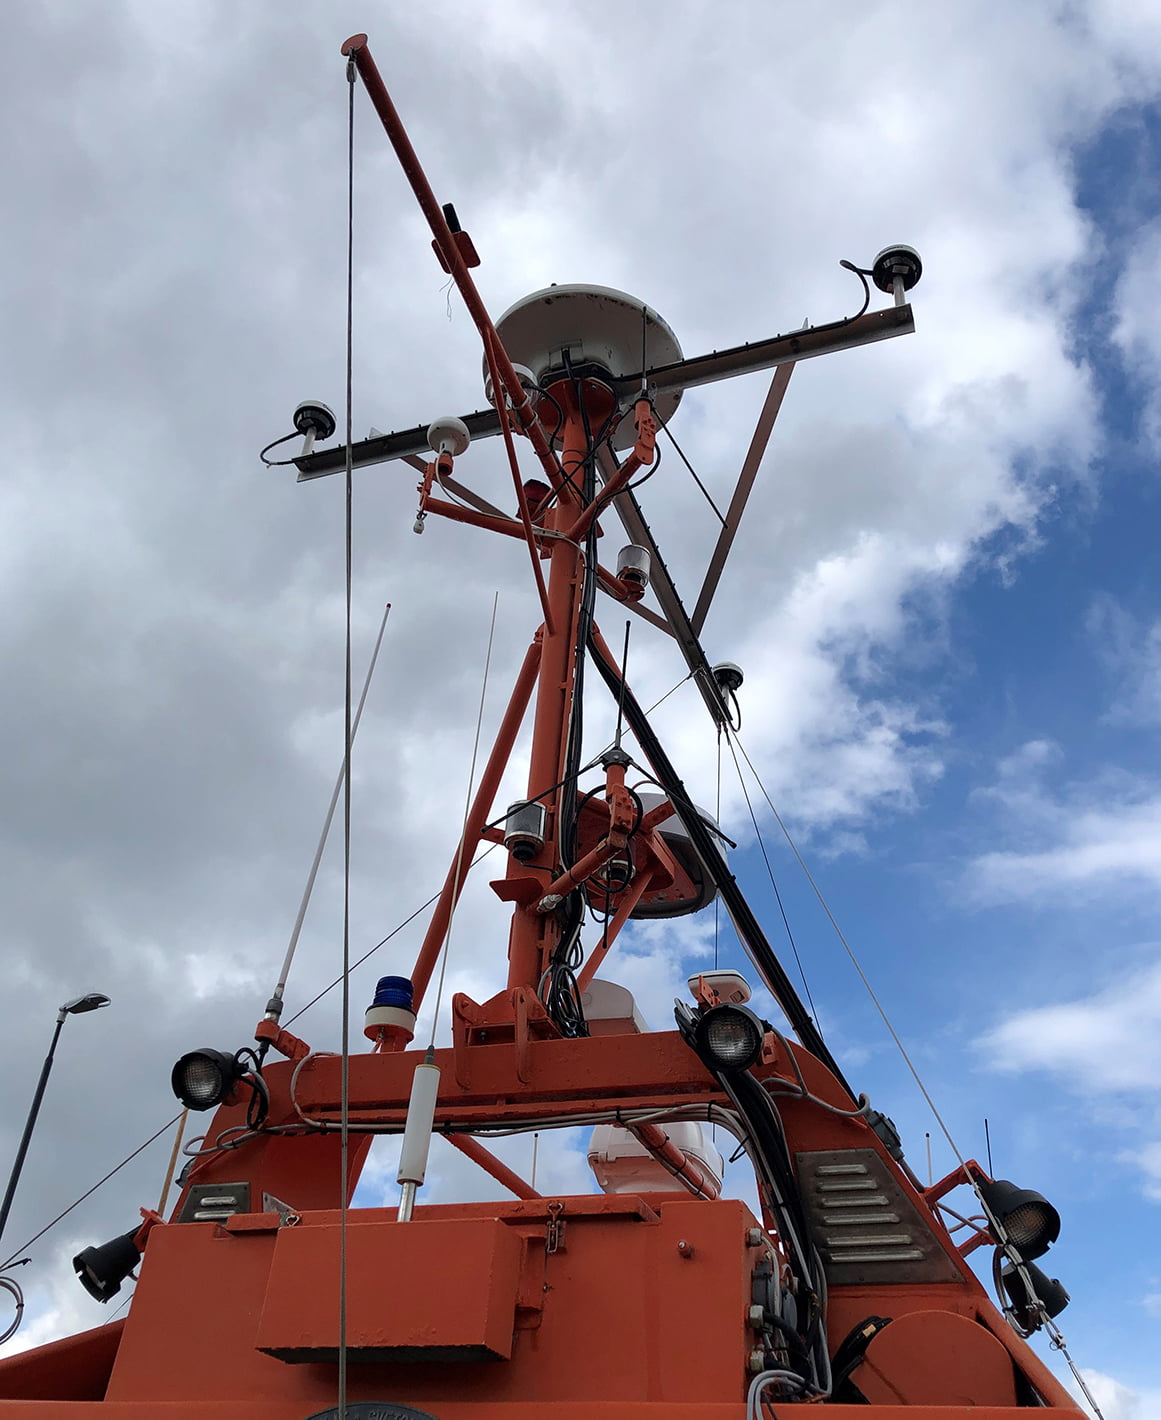 The three GNSS antennas that measure the boat's position and direction with very high accuracy.  Also visible is the radar, which provides a complete radar view around the entire boat.